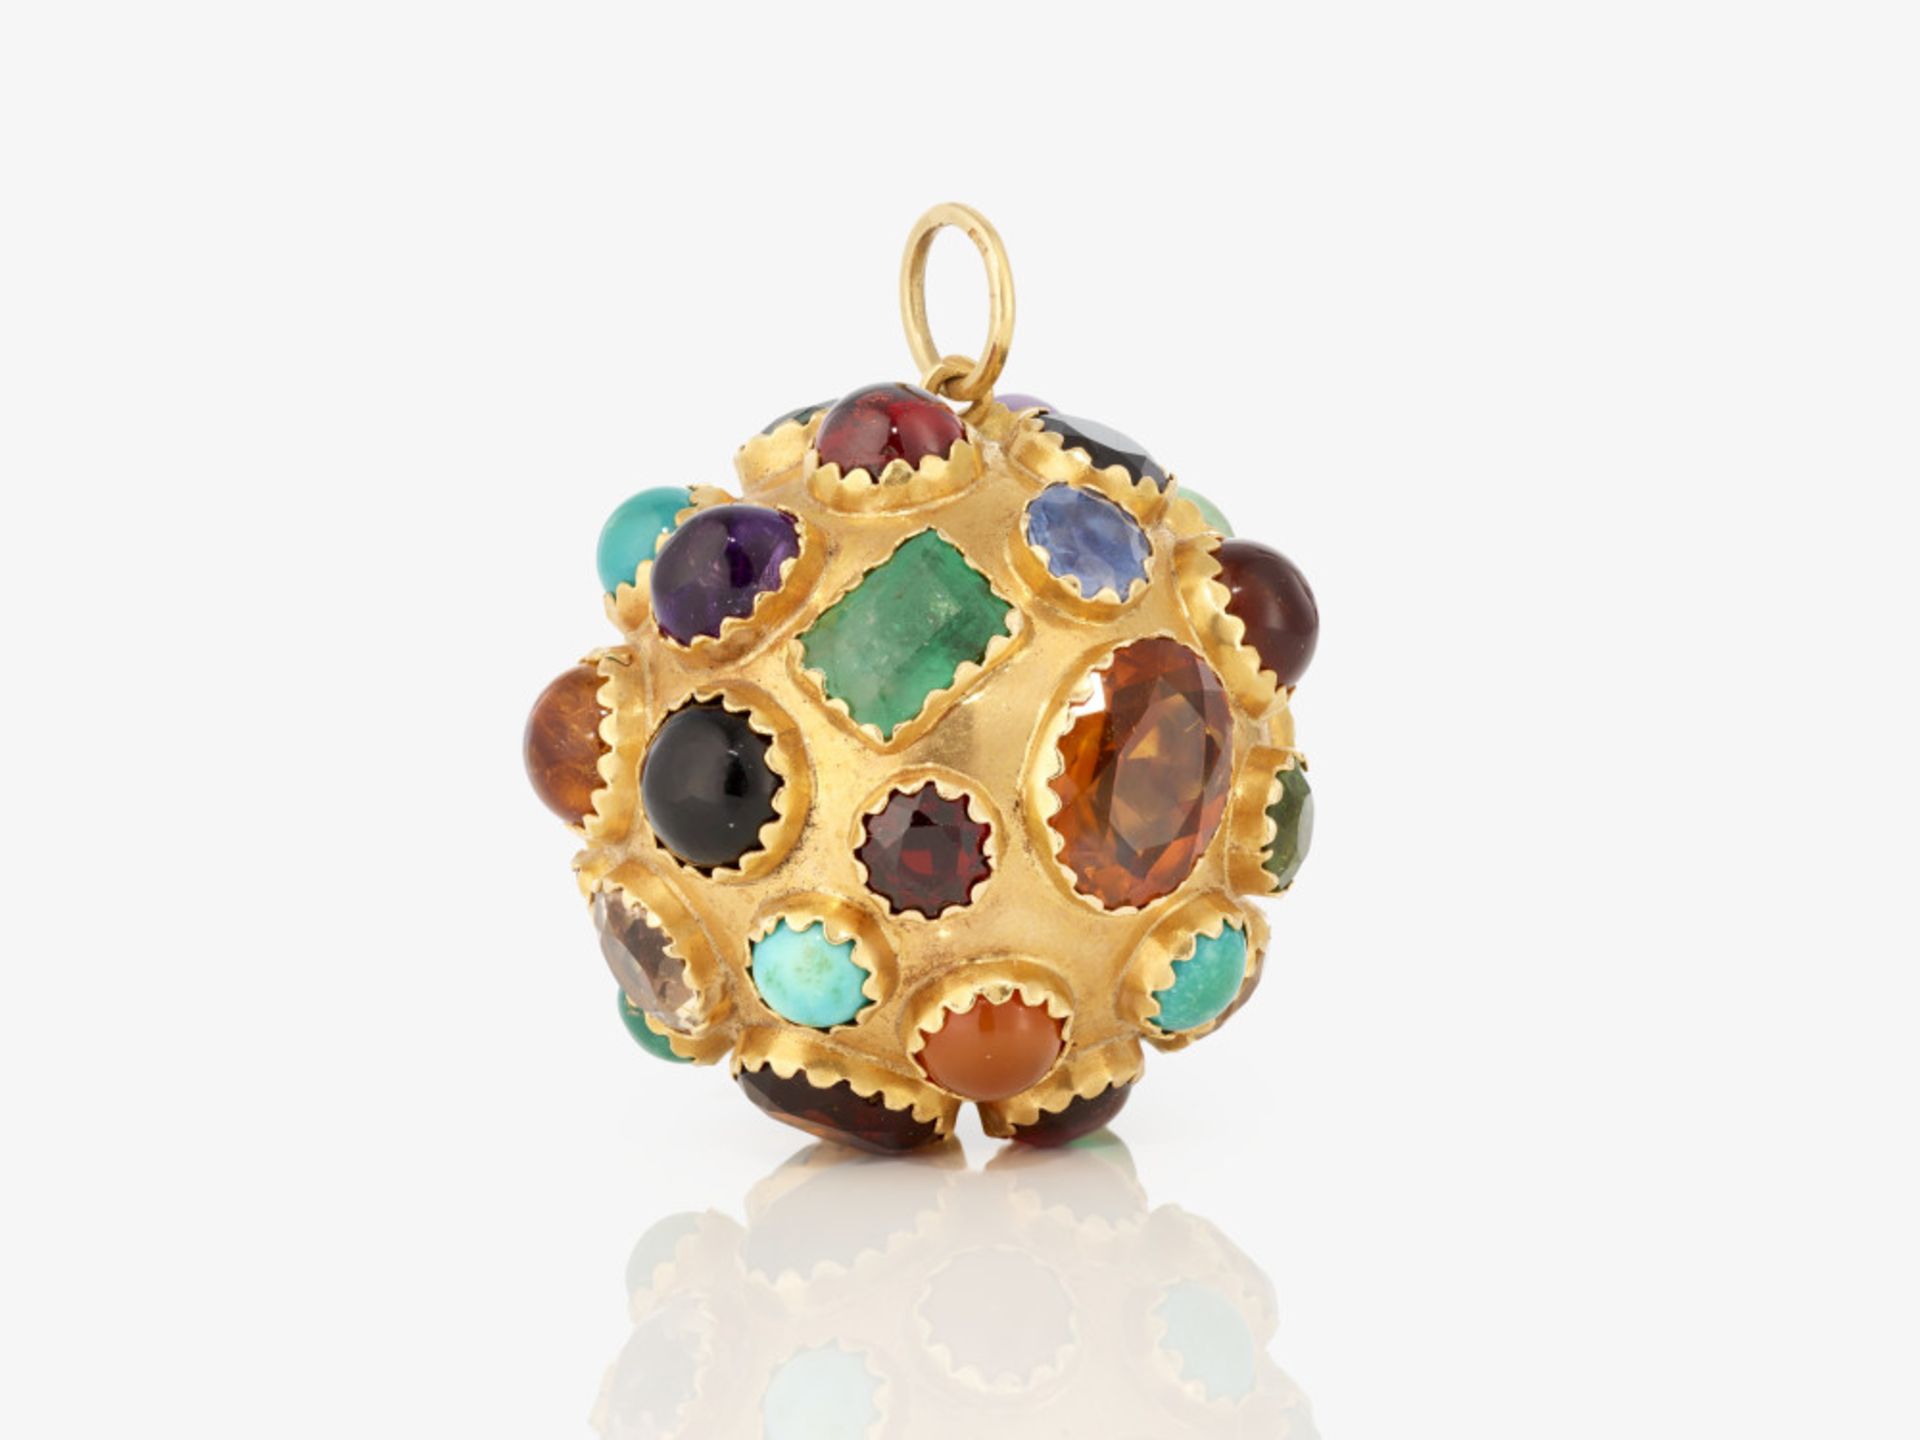 A spherical pendant with numerous coloured gemstones - Germany, 1970s